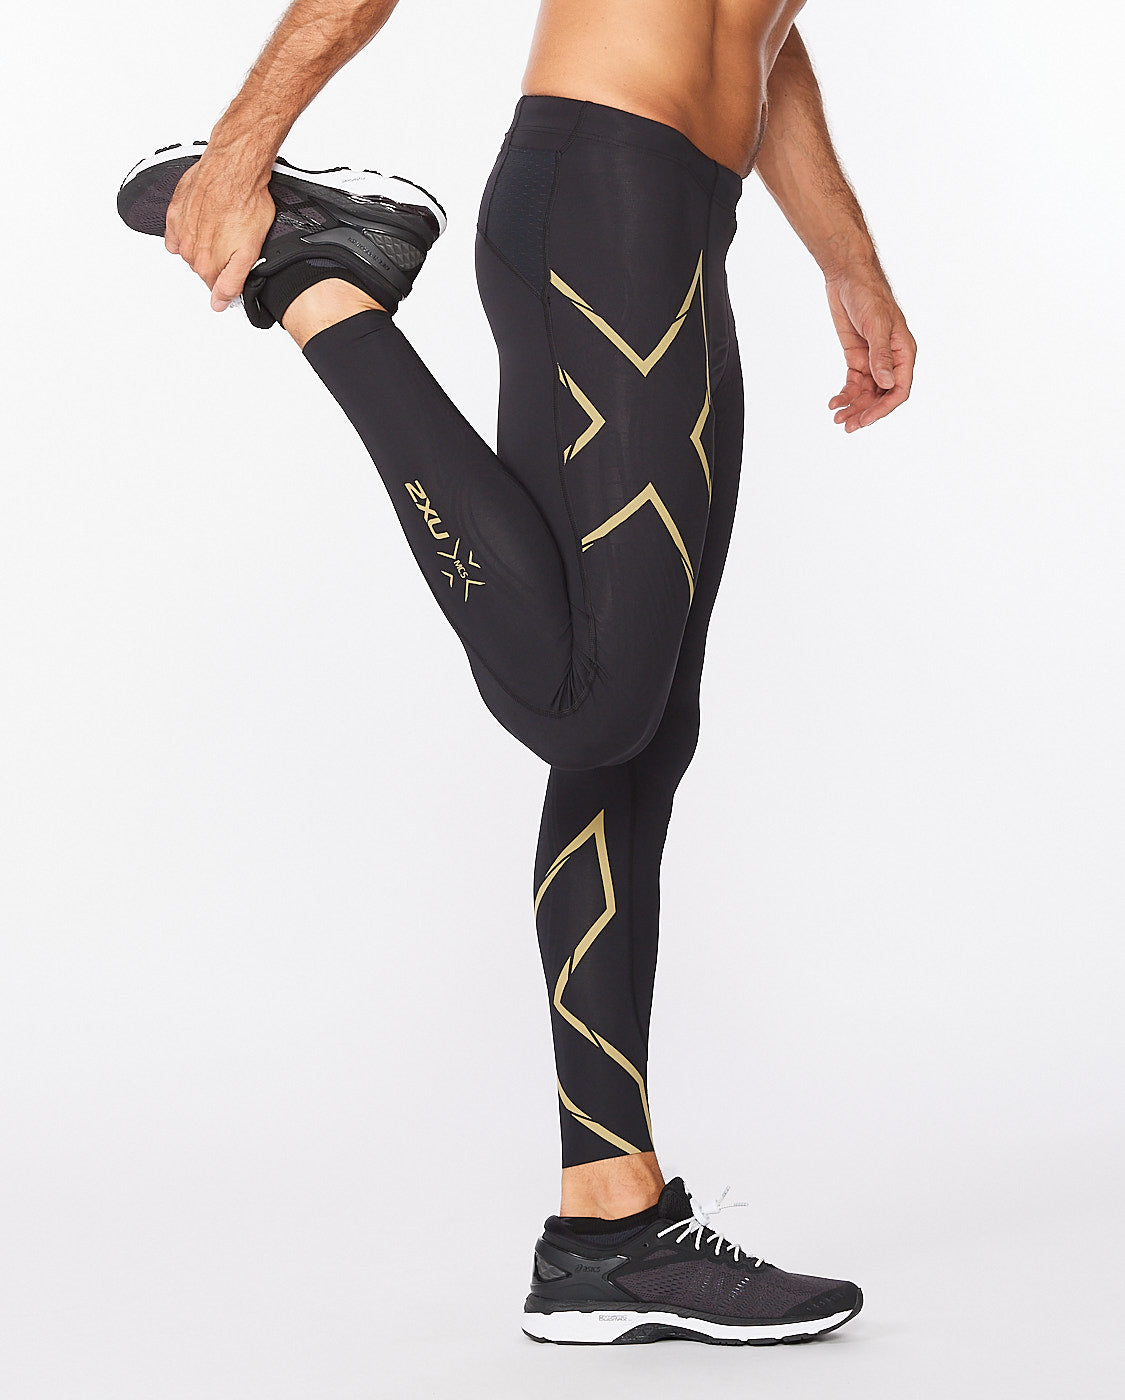 SKINS - CALF TIGHTS - add the compression kick you need to